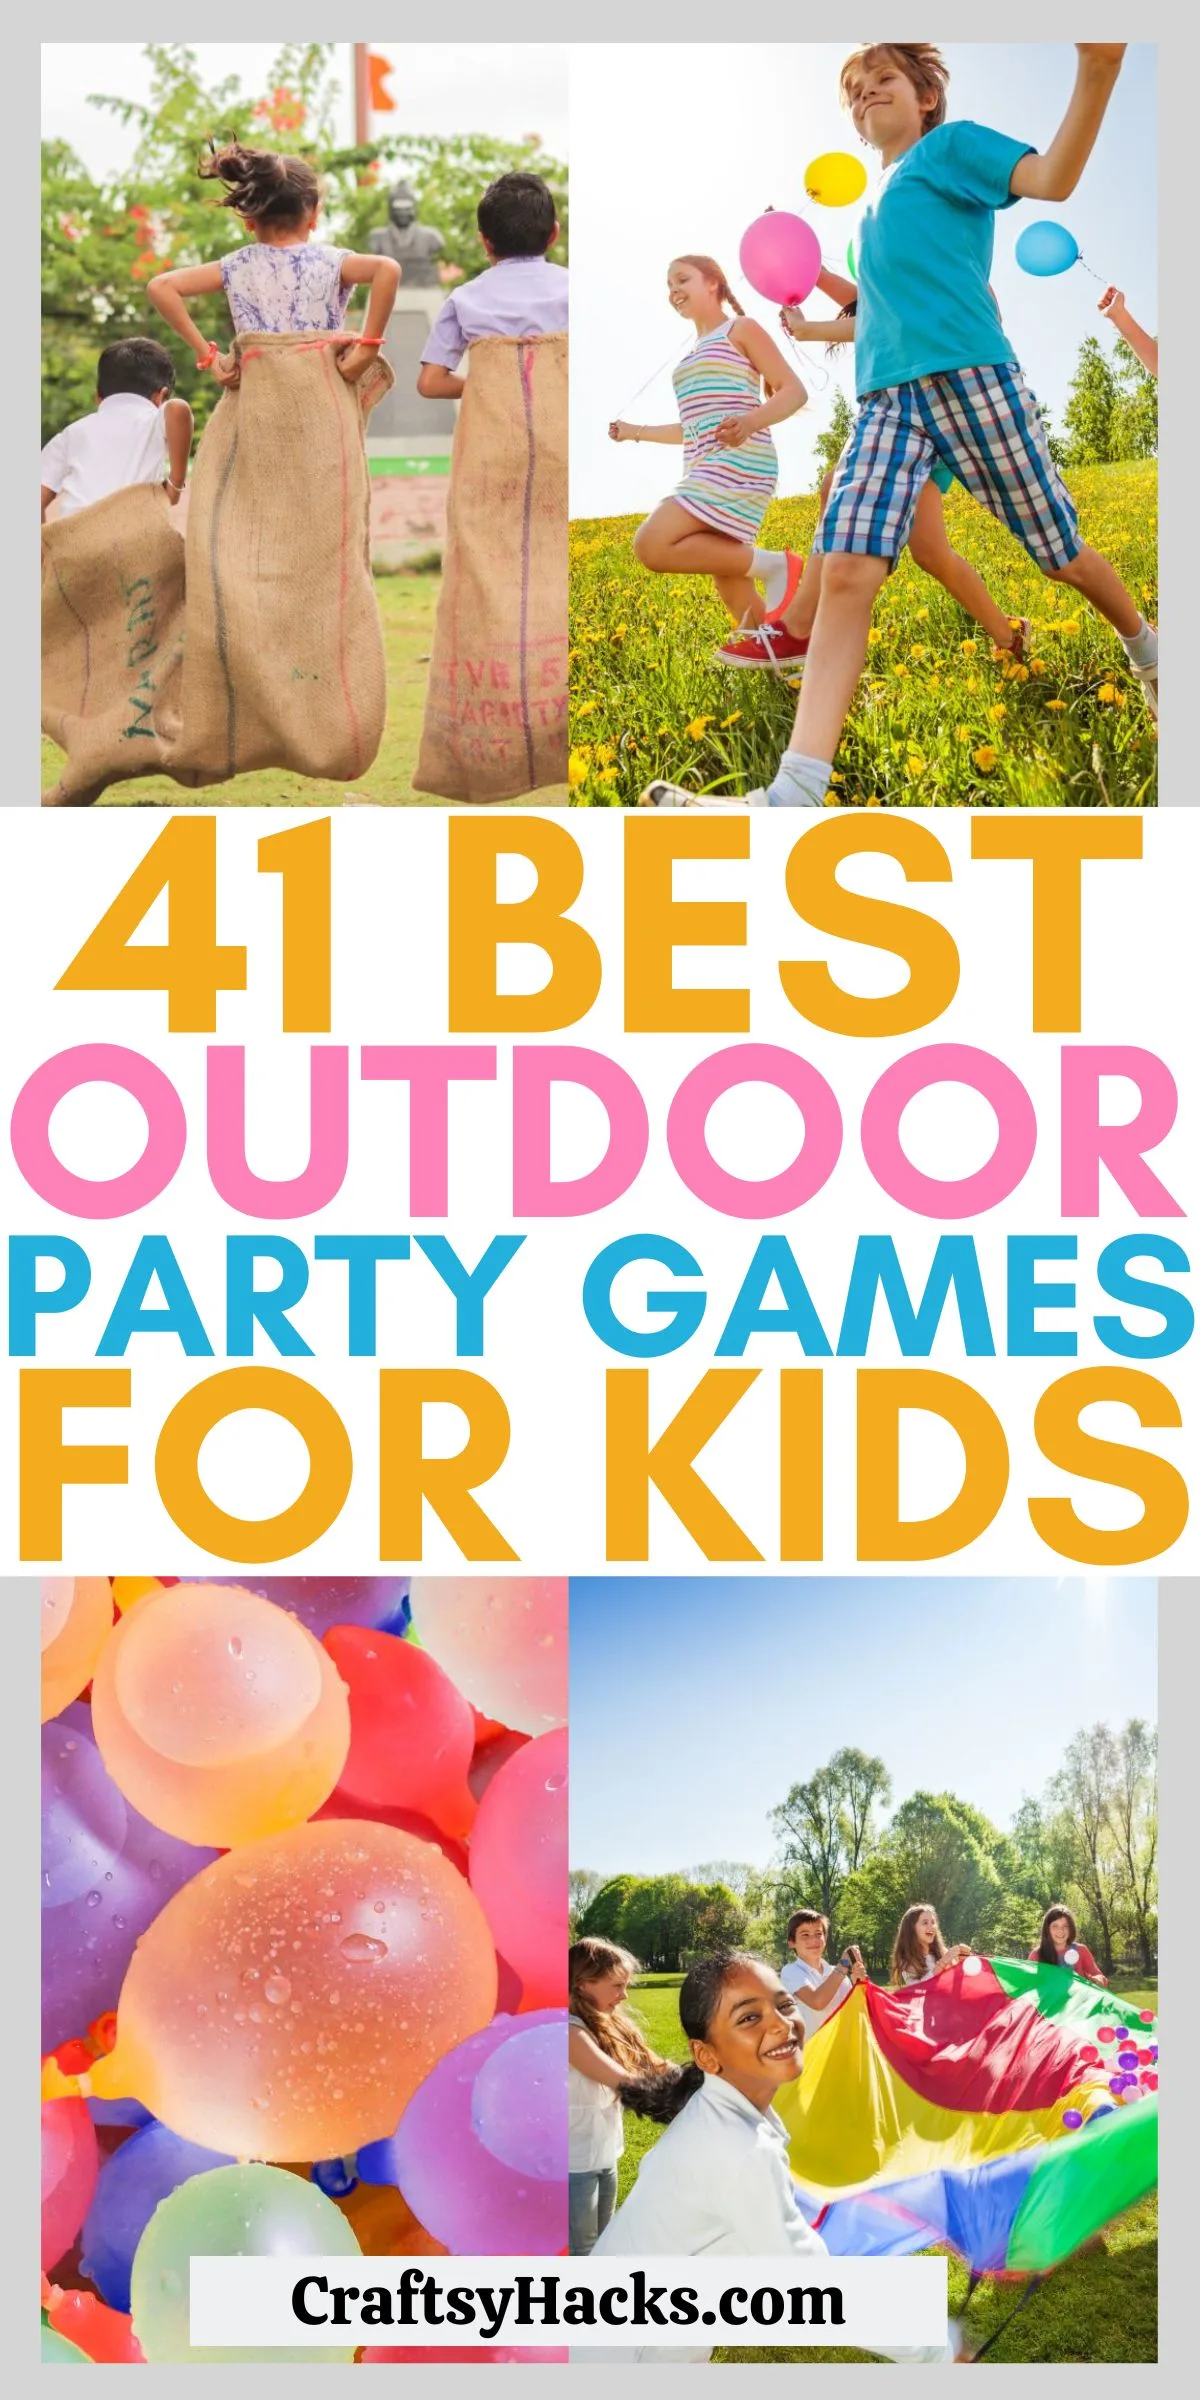 20 Highly Entertaining Party Games for Tweens and Older Kids